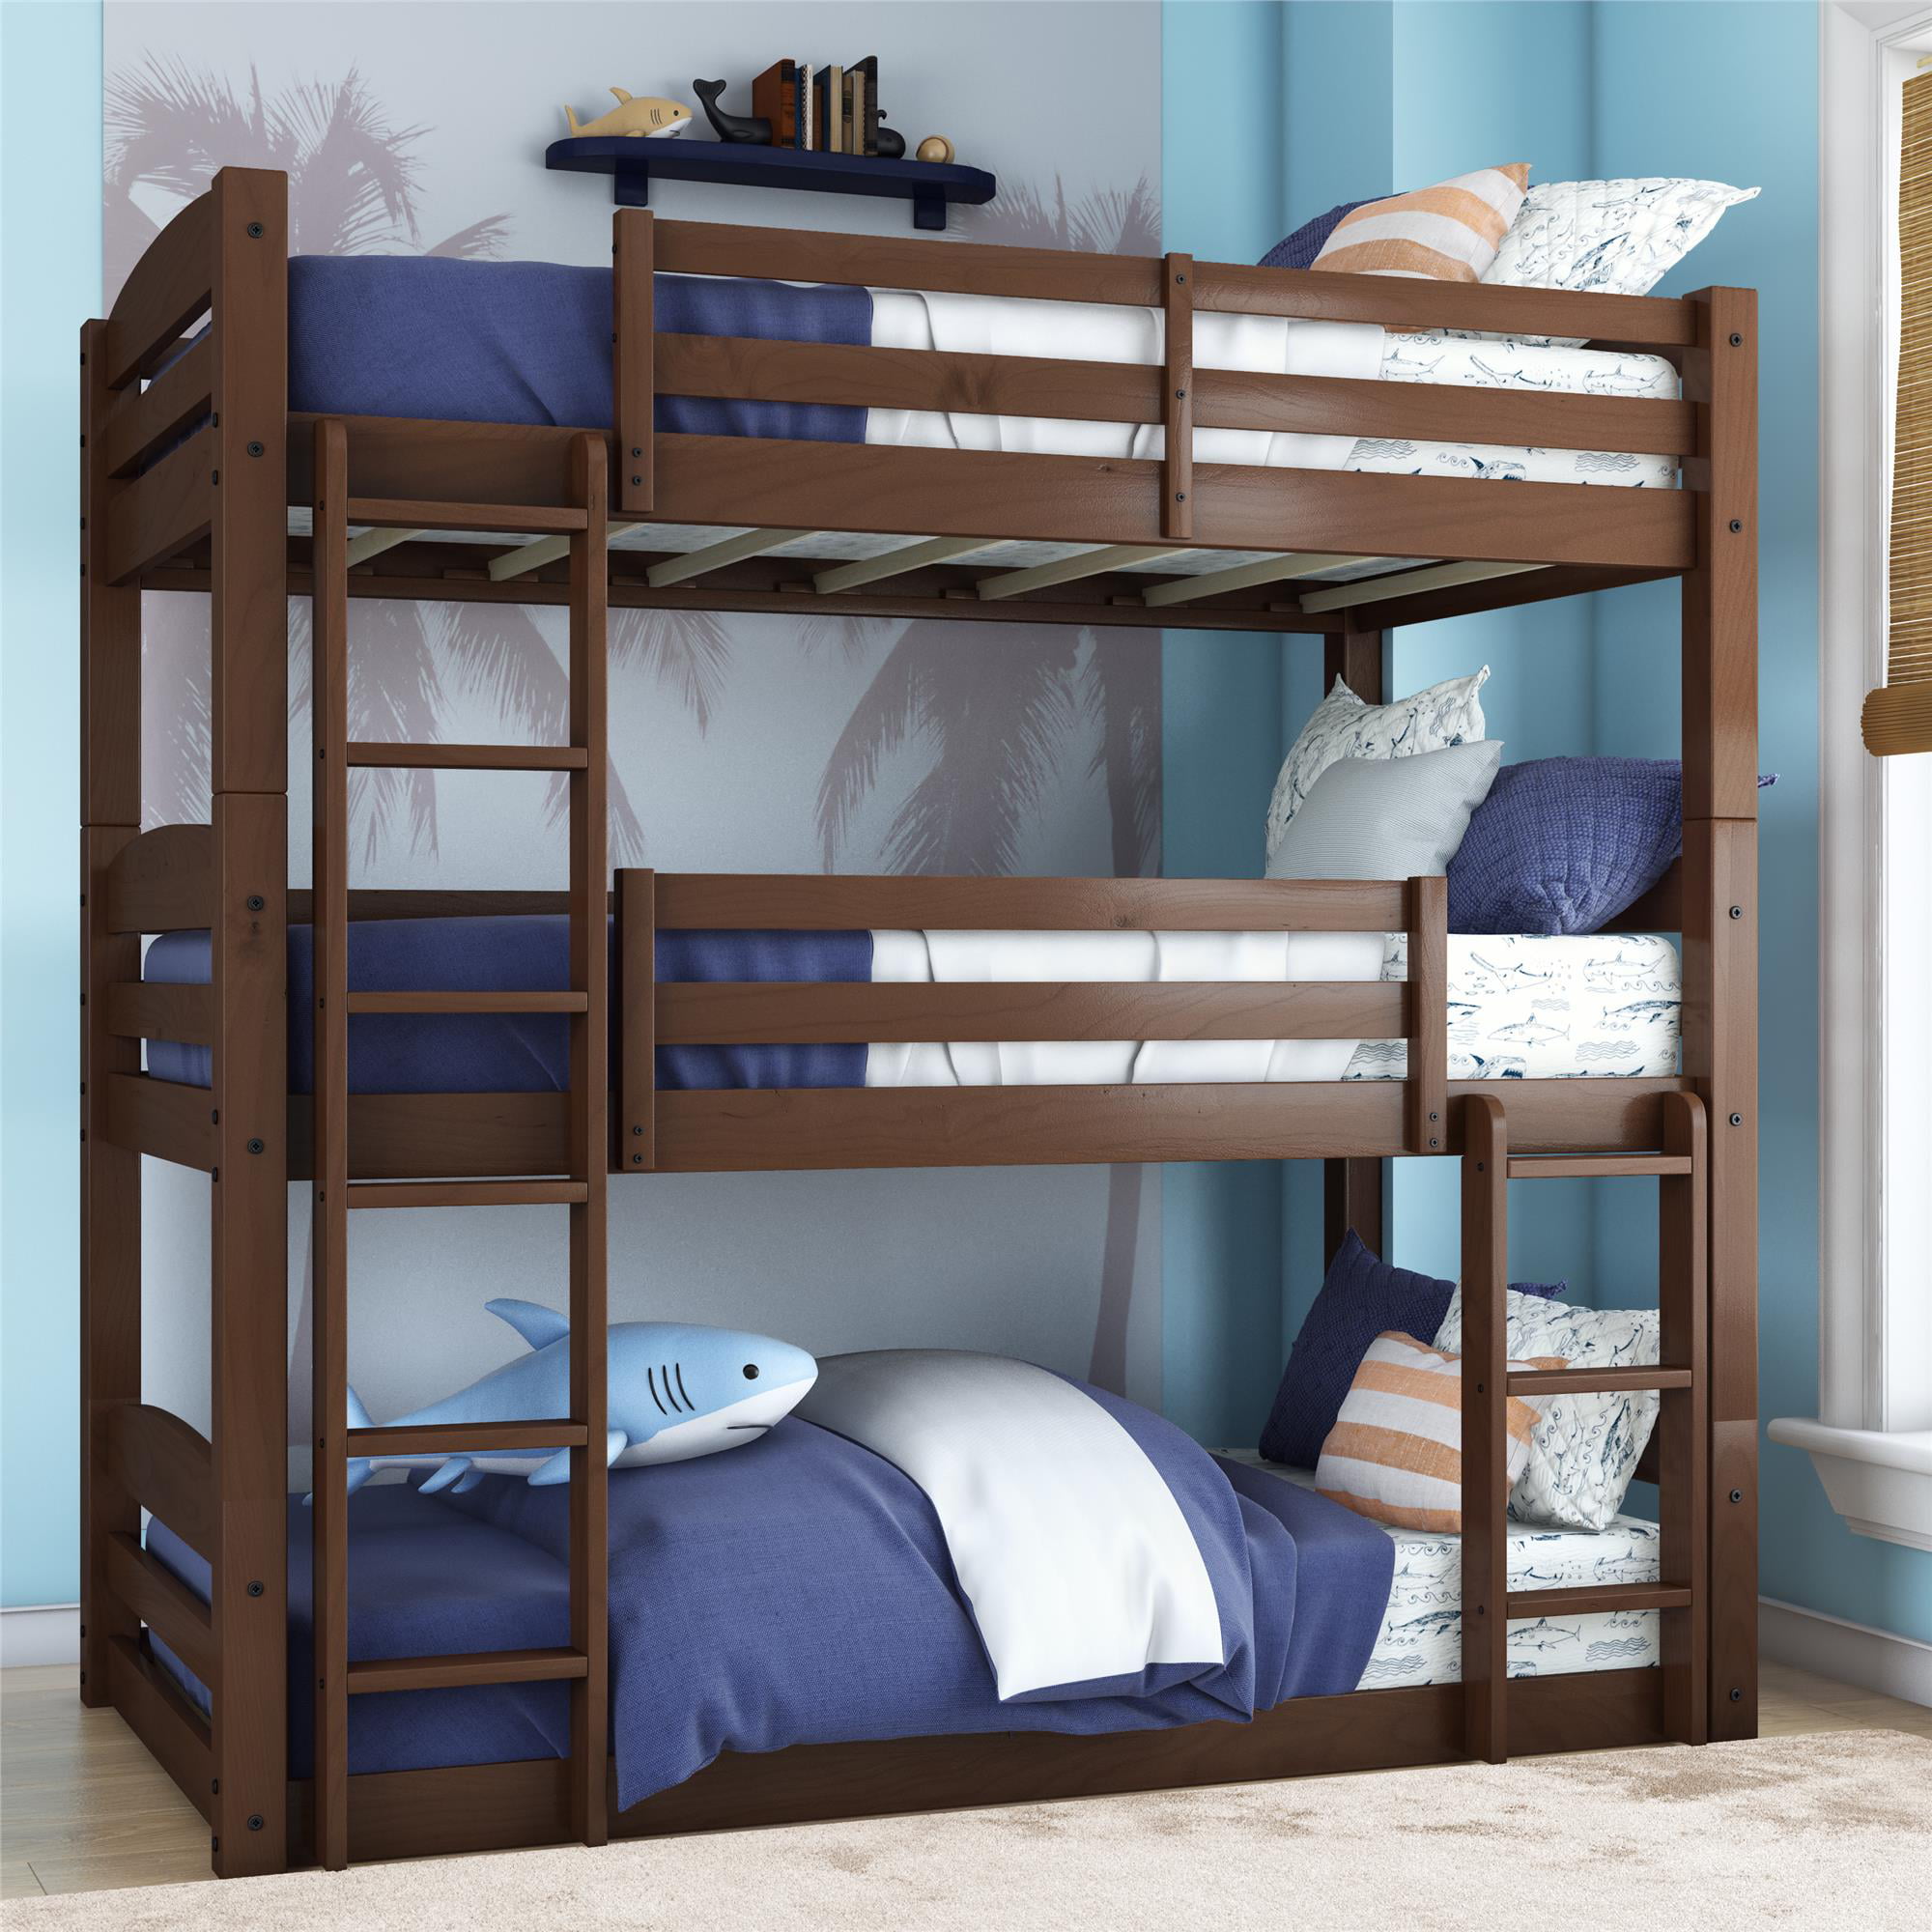 Better Homes And Gardens Tristan Wooden, Triple Bunk Bed Dimensions